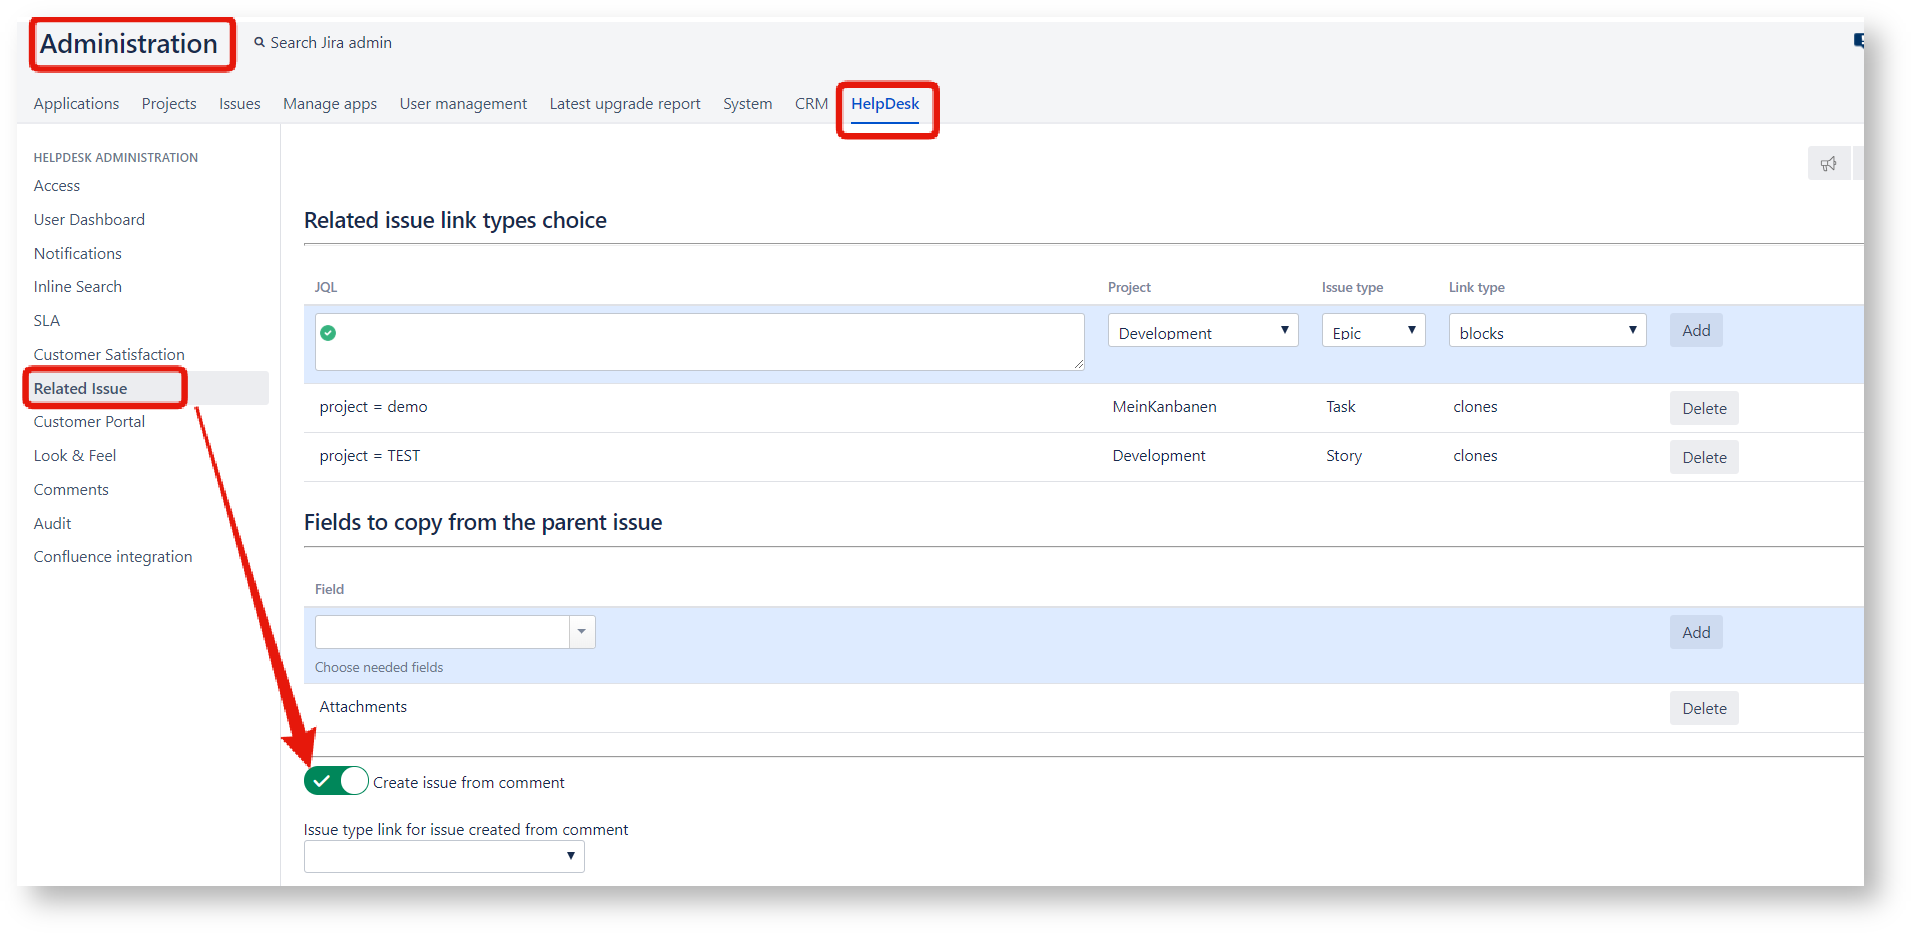 Create Issue From Comment Help Desk For Jira 1 9 10 Teamlead Wiki